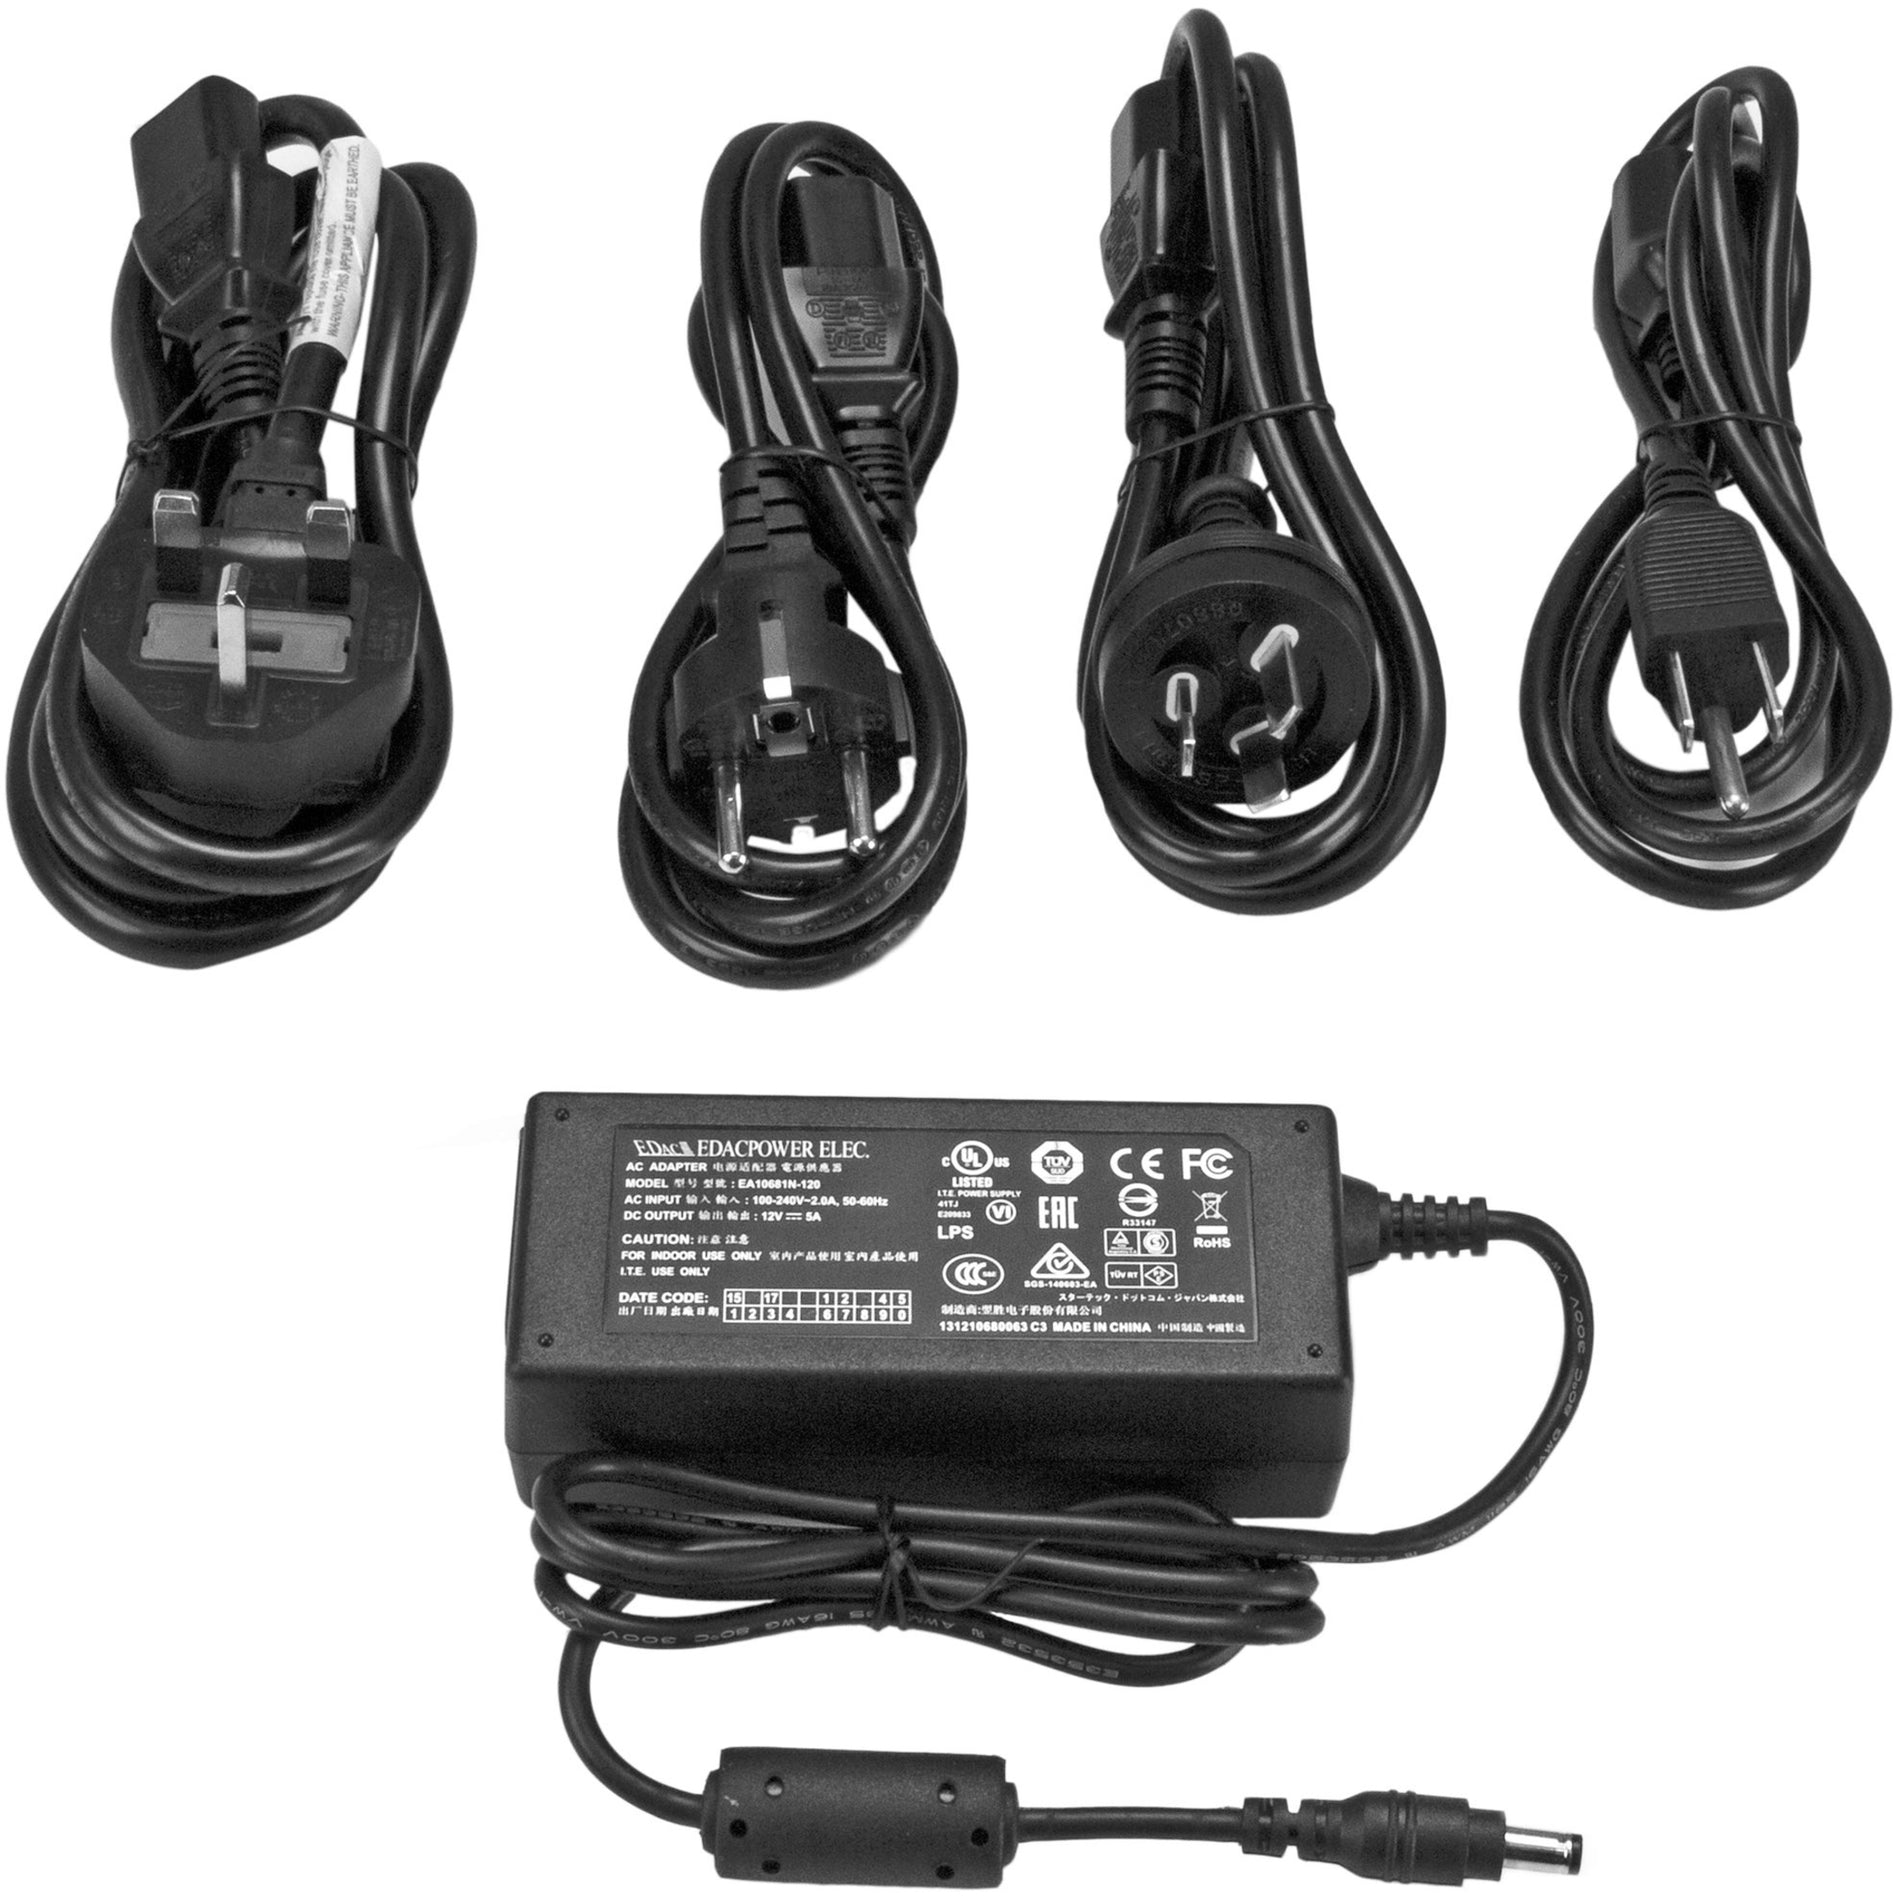 StarTech.com SVA12M5NA Replacement 12V DC Power Adapter - 12 Volts 5 Amps, Limited 2 Year Warranty, RoHS & WEEE Certified